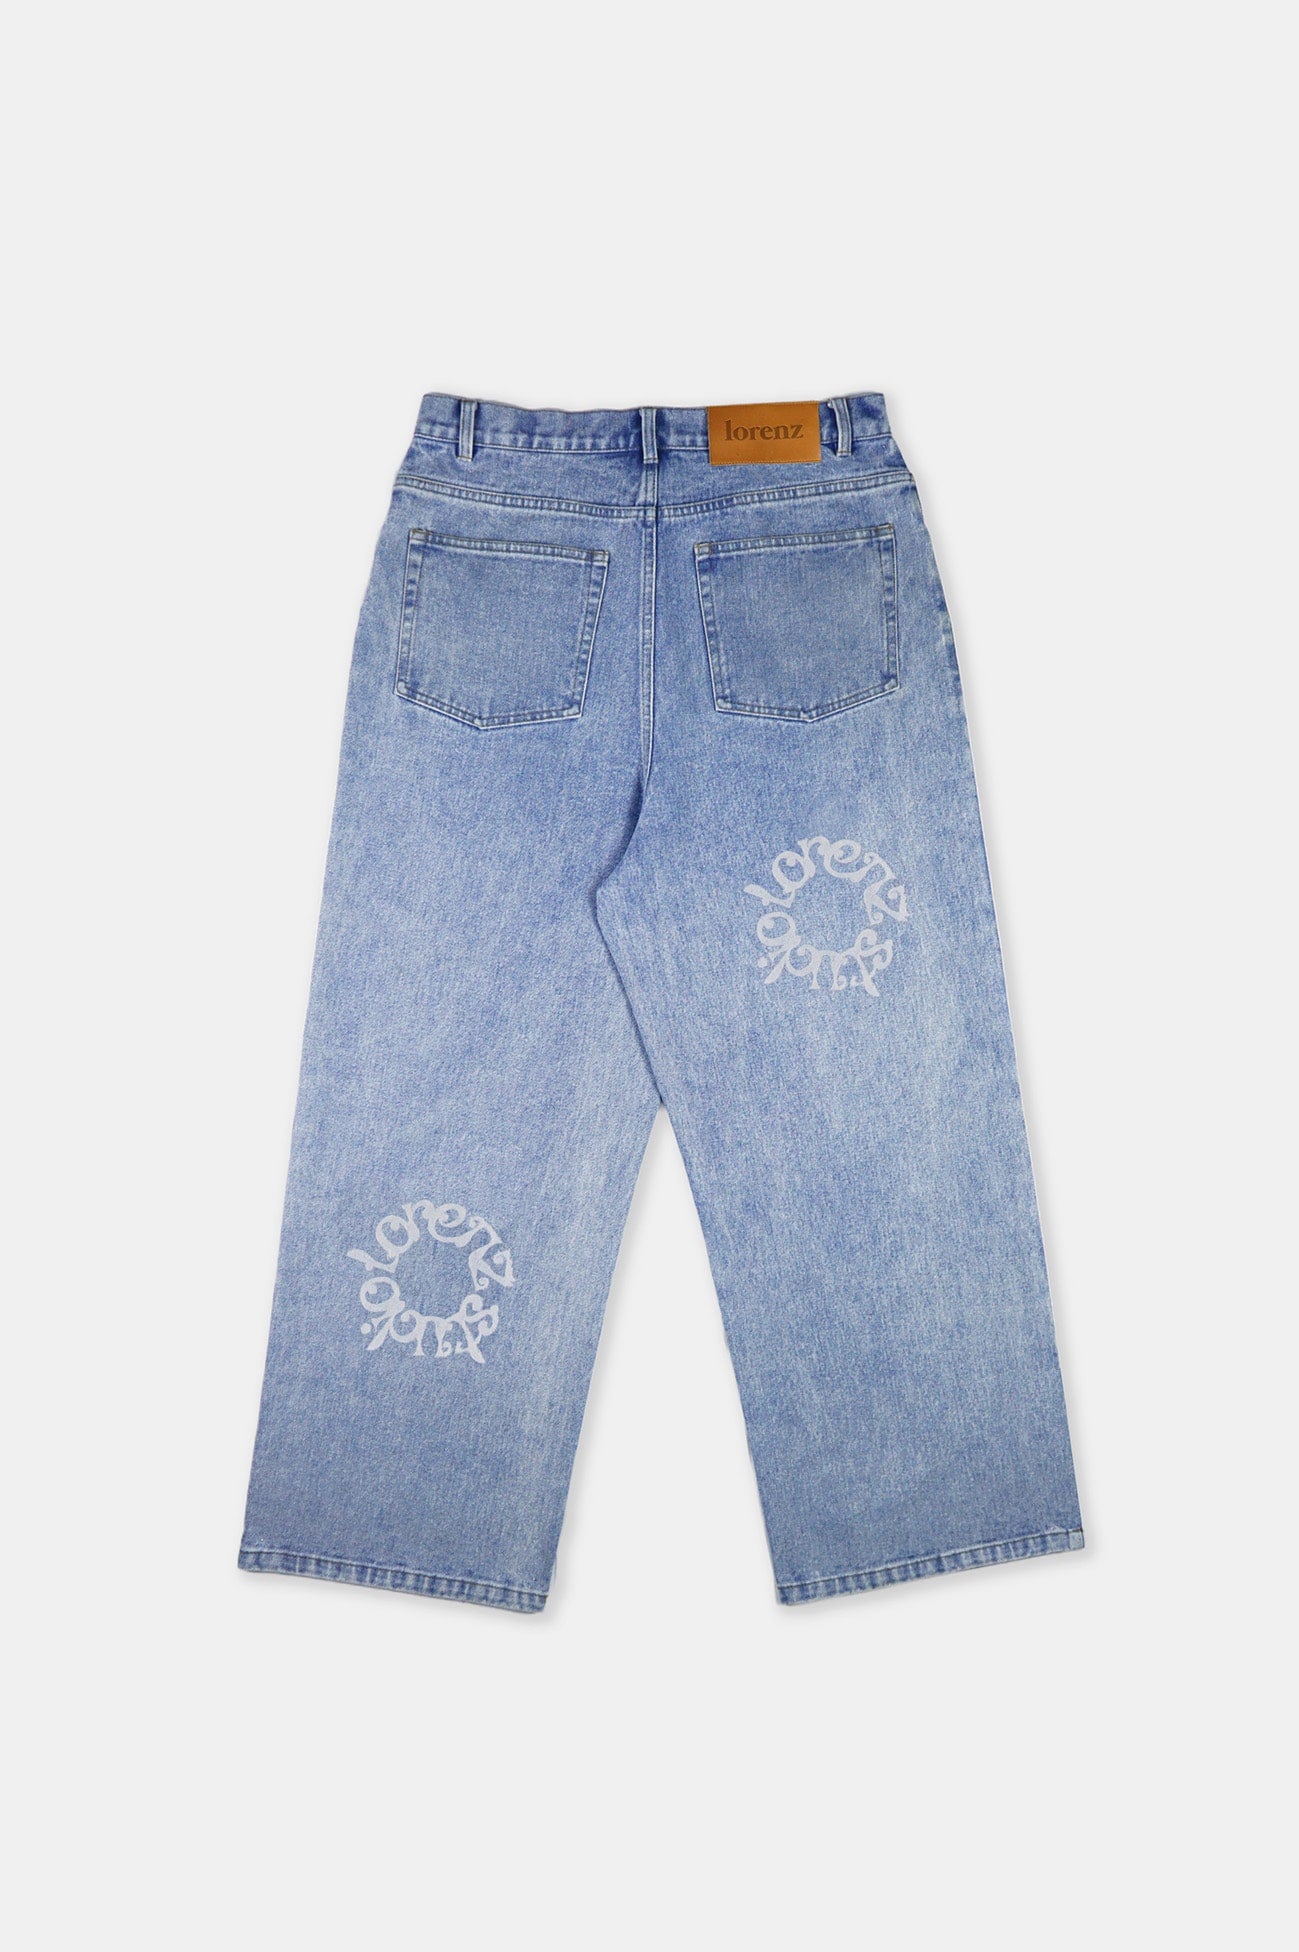 Neptune Loose Fitted Jeans - Acid Wash Blue